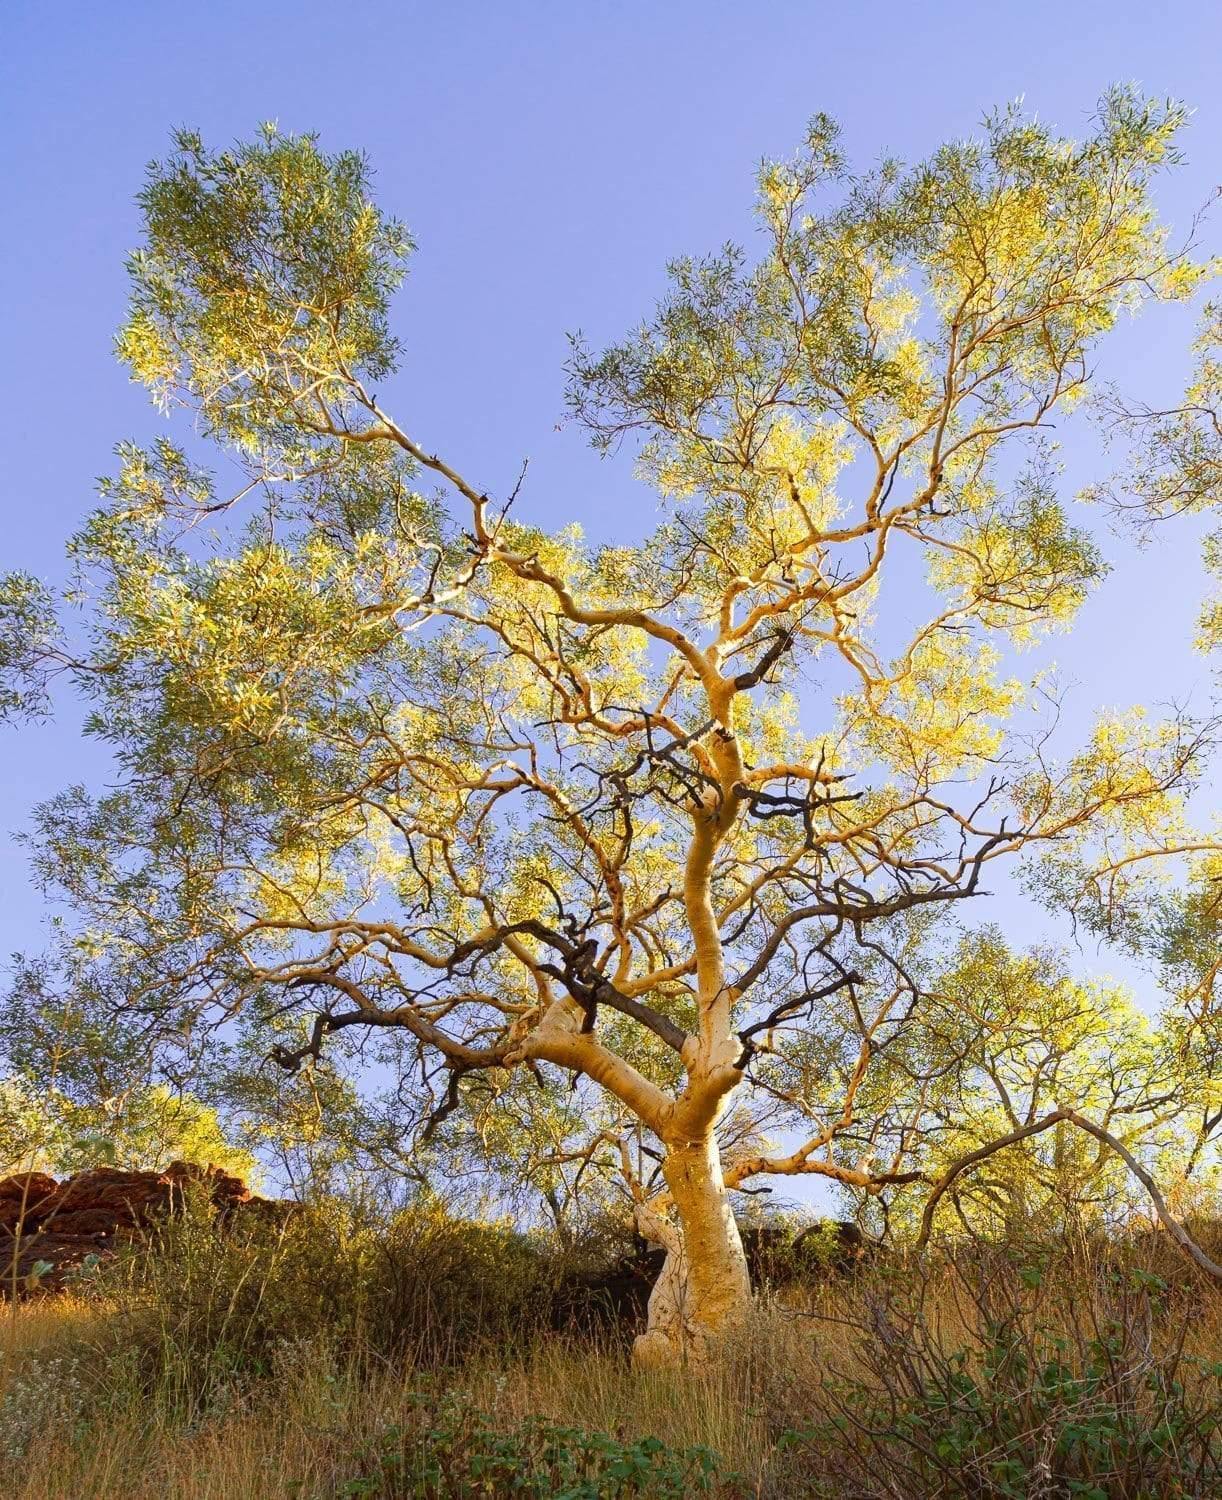 A sum tree with a lot of nested branches in a bushy field, Snappy Gum Glow - Karijini, The Pilbara